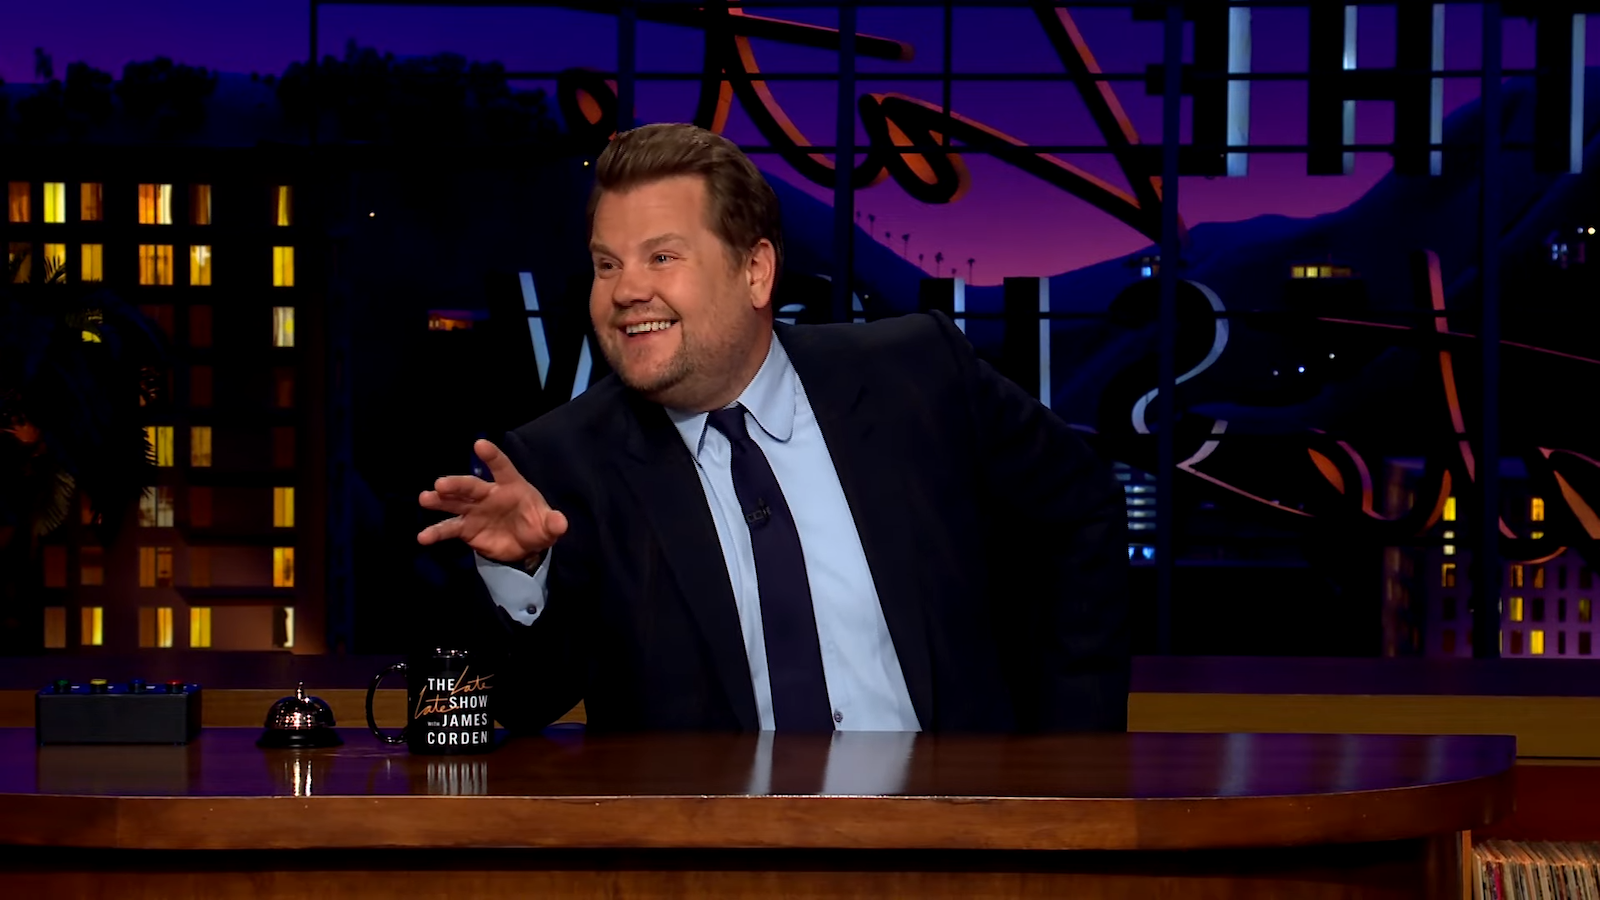 The dirty joke told on ‘The Late Late Show’ that had James Corden and staff laughing hysterically